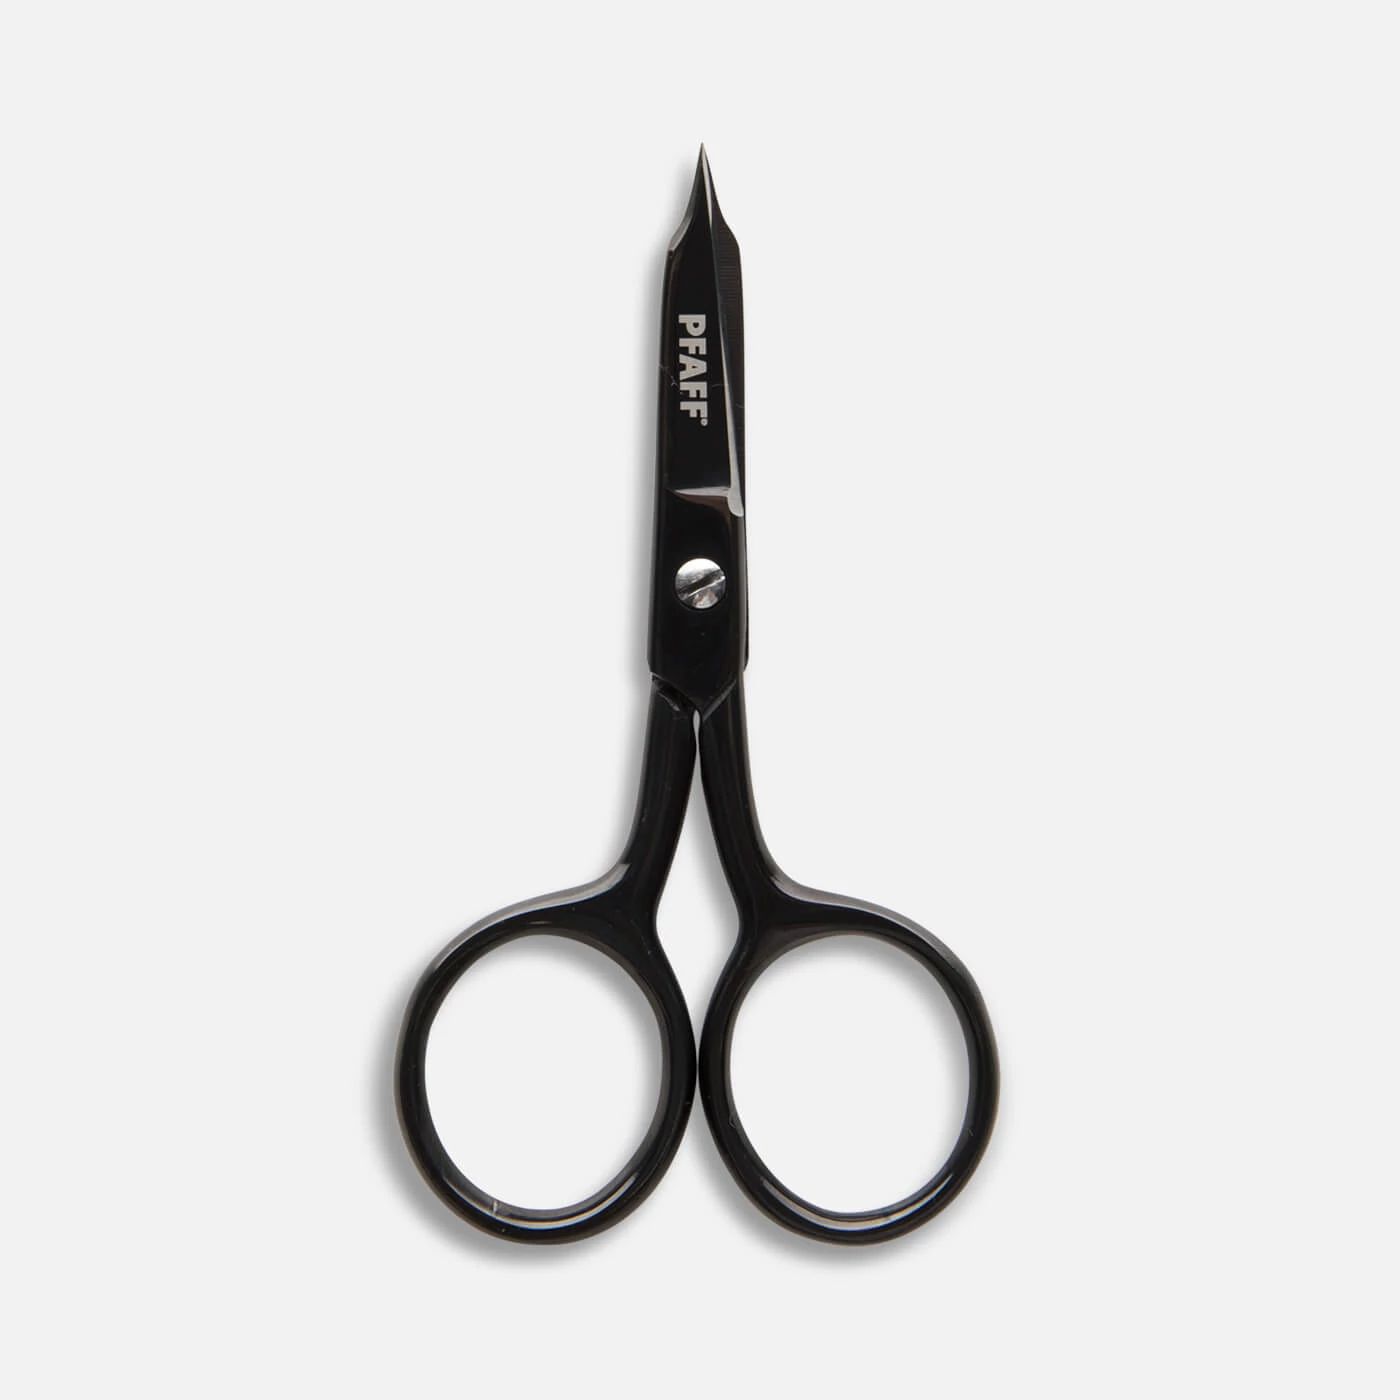 Professional Fancy and embroidery scissor Top Quality stainless